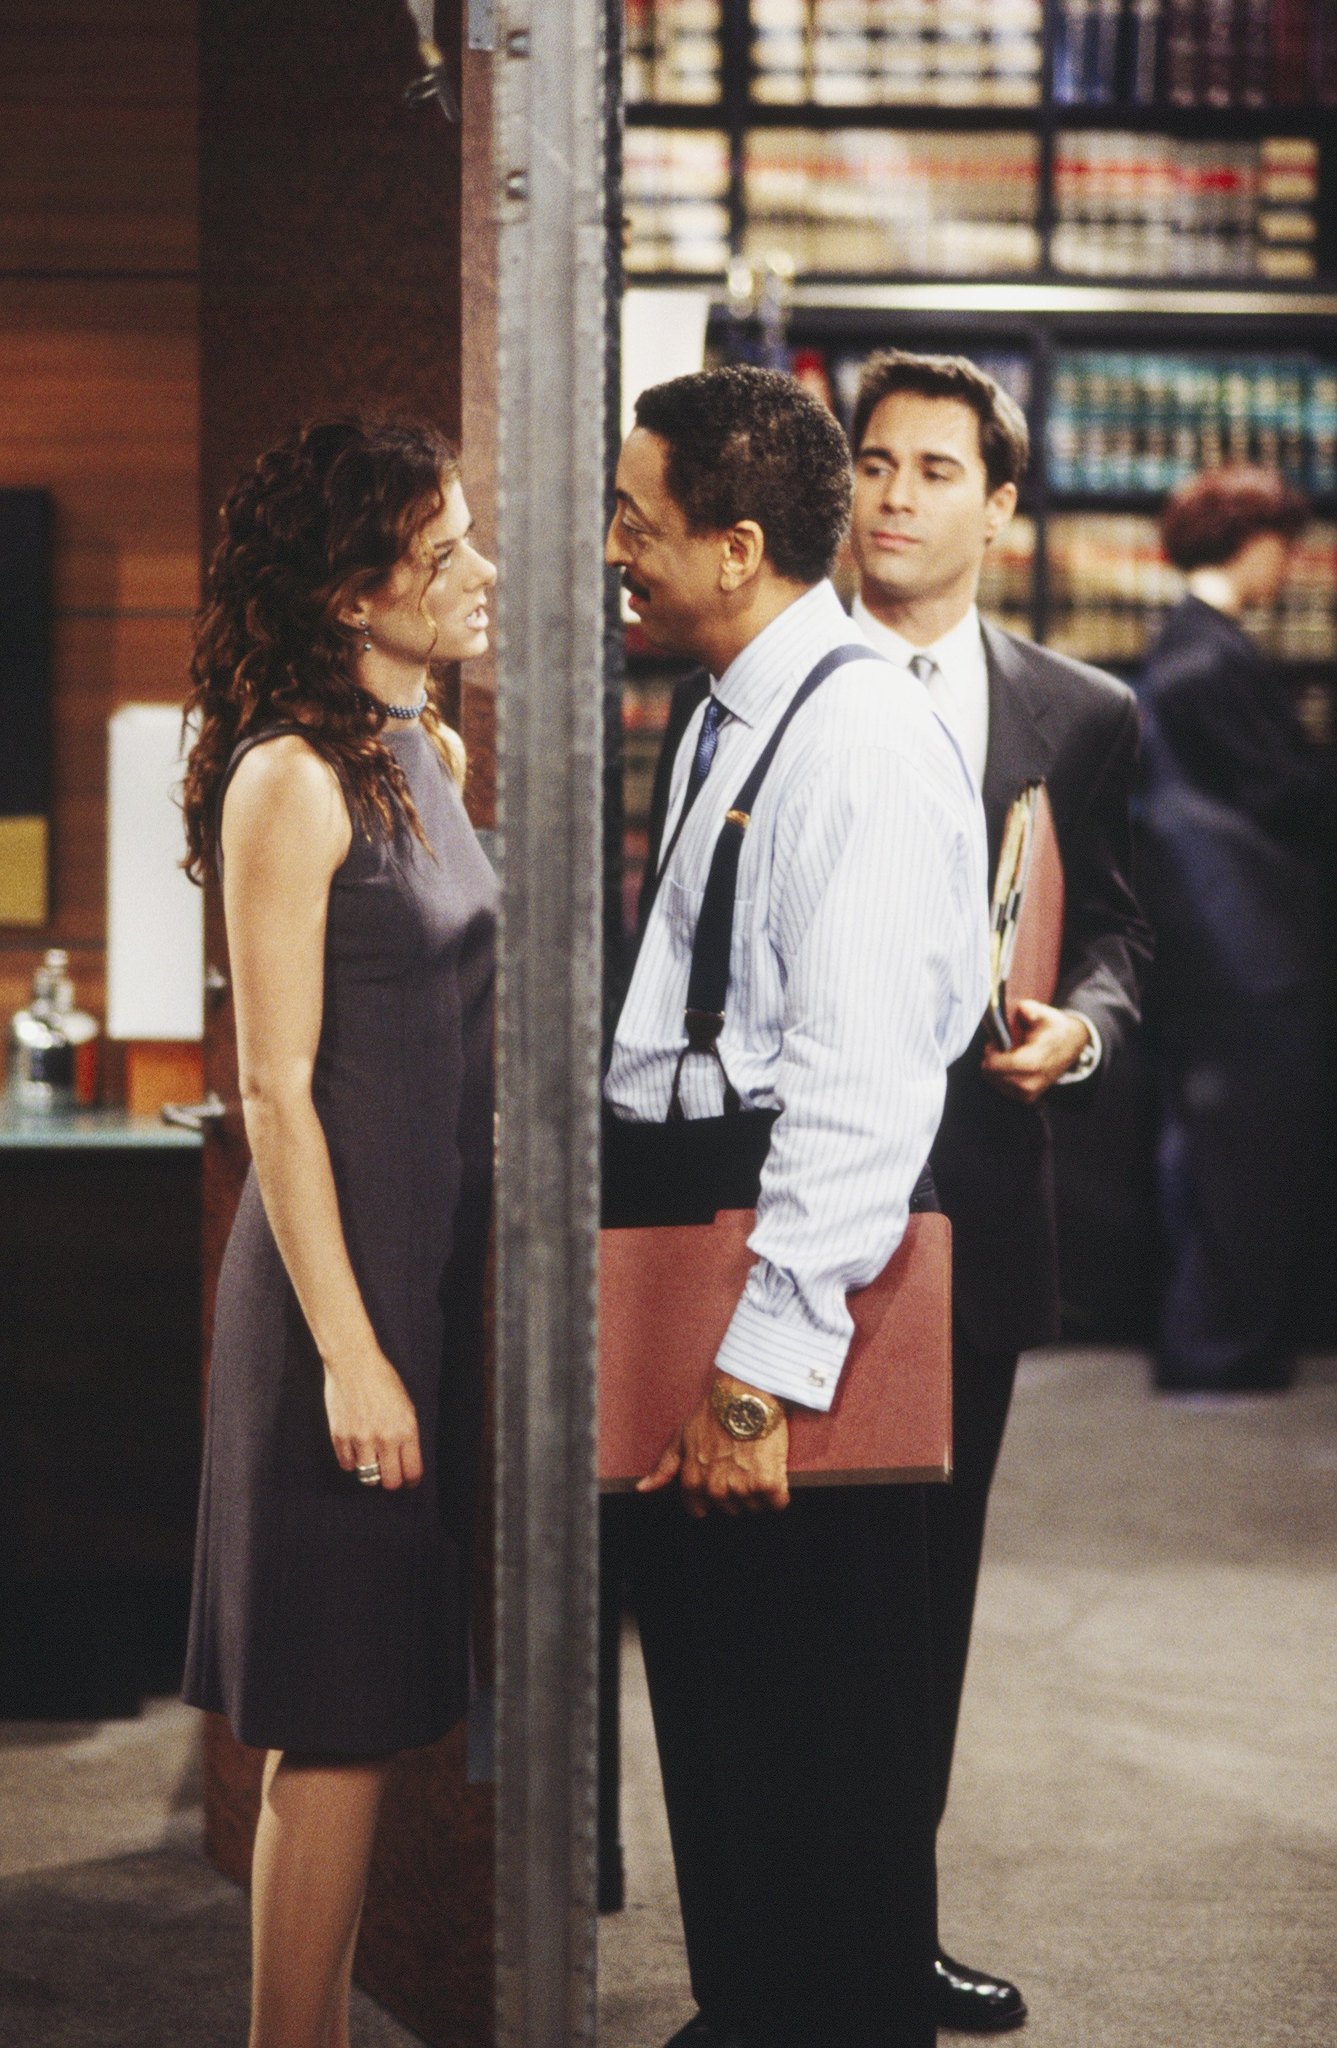 Still of Gregory Hines, Eric McCormack and Debra Messing in Will & Grace (1998)